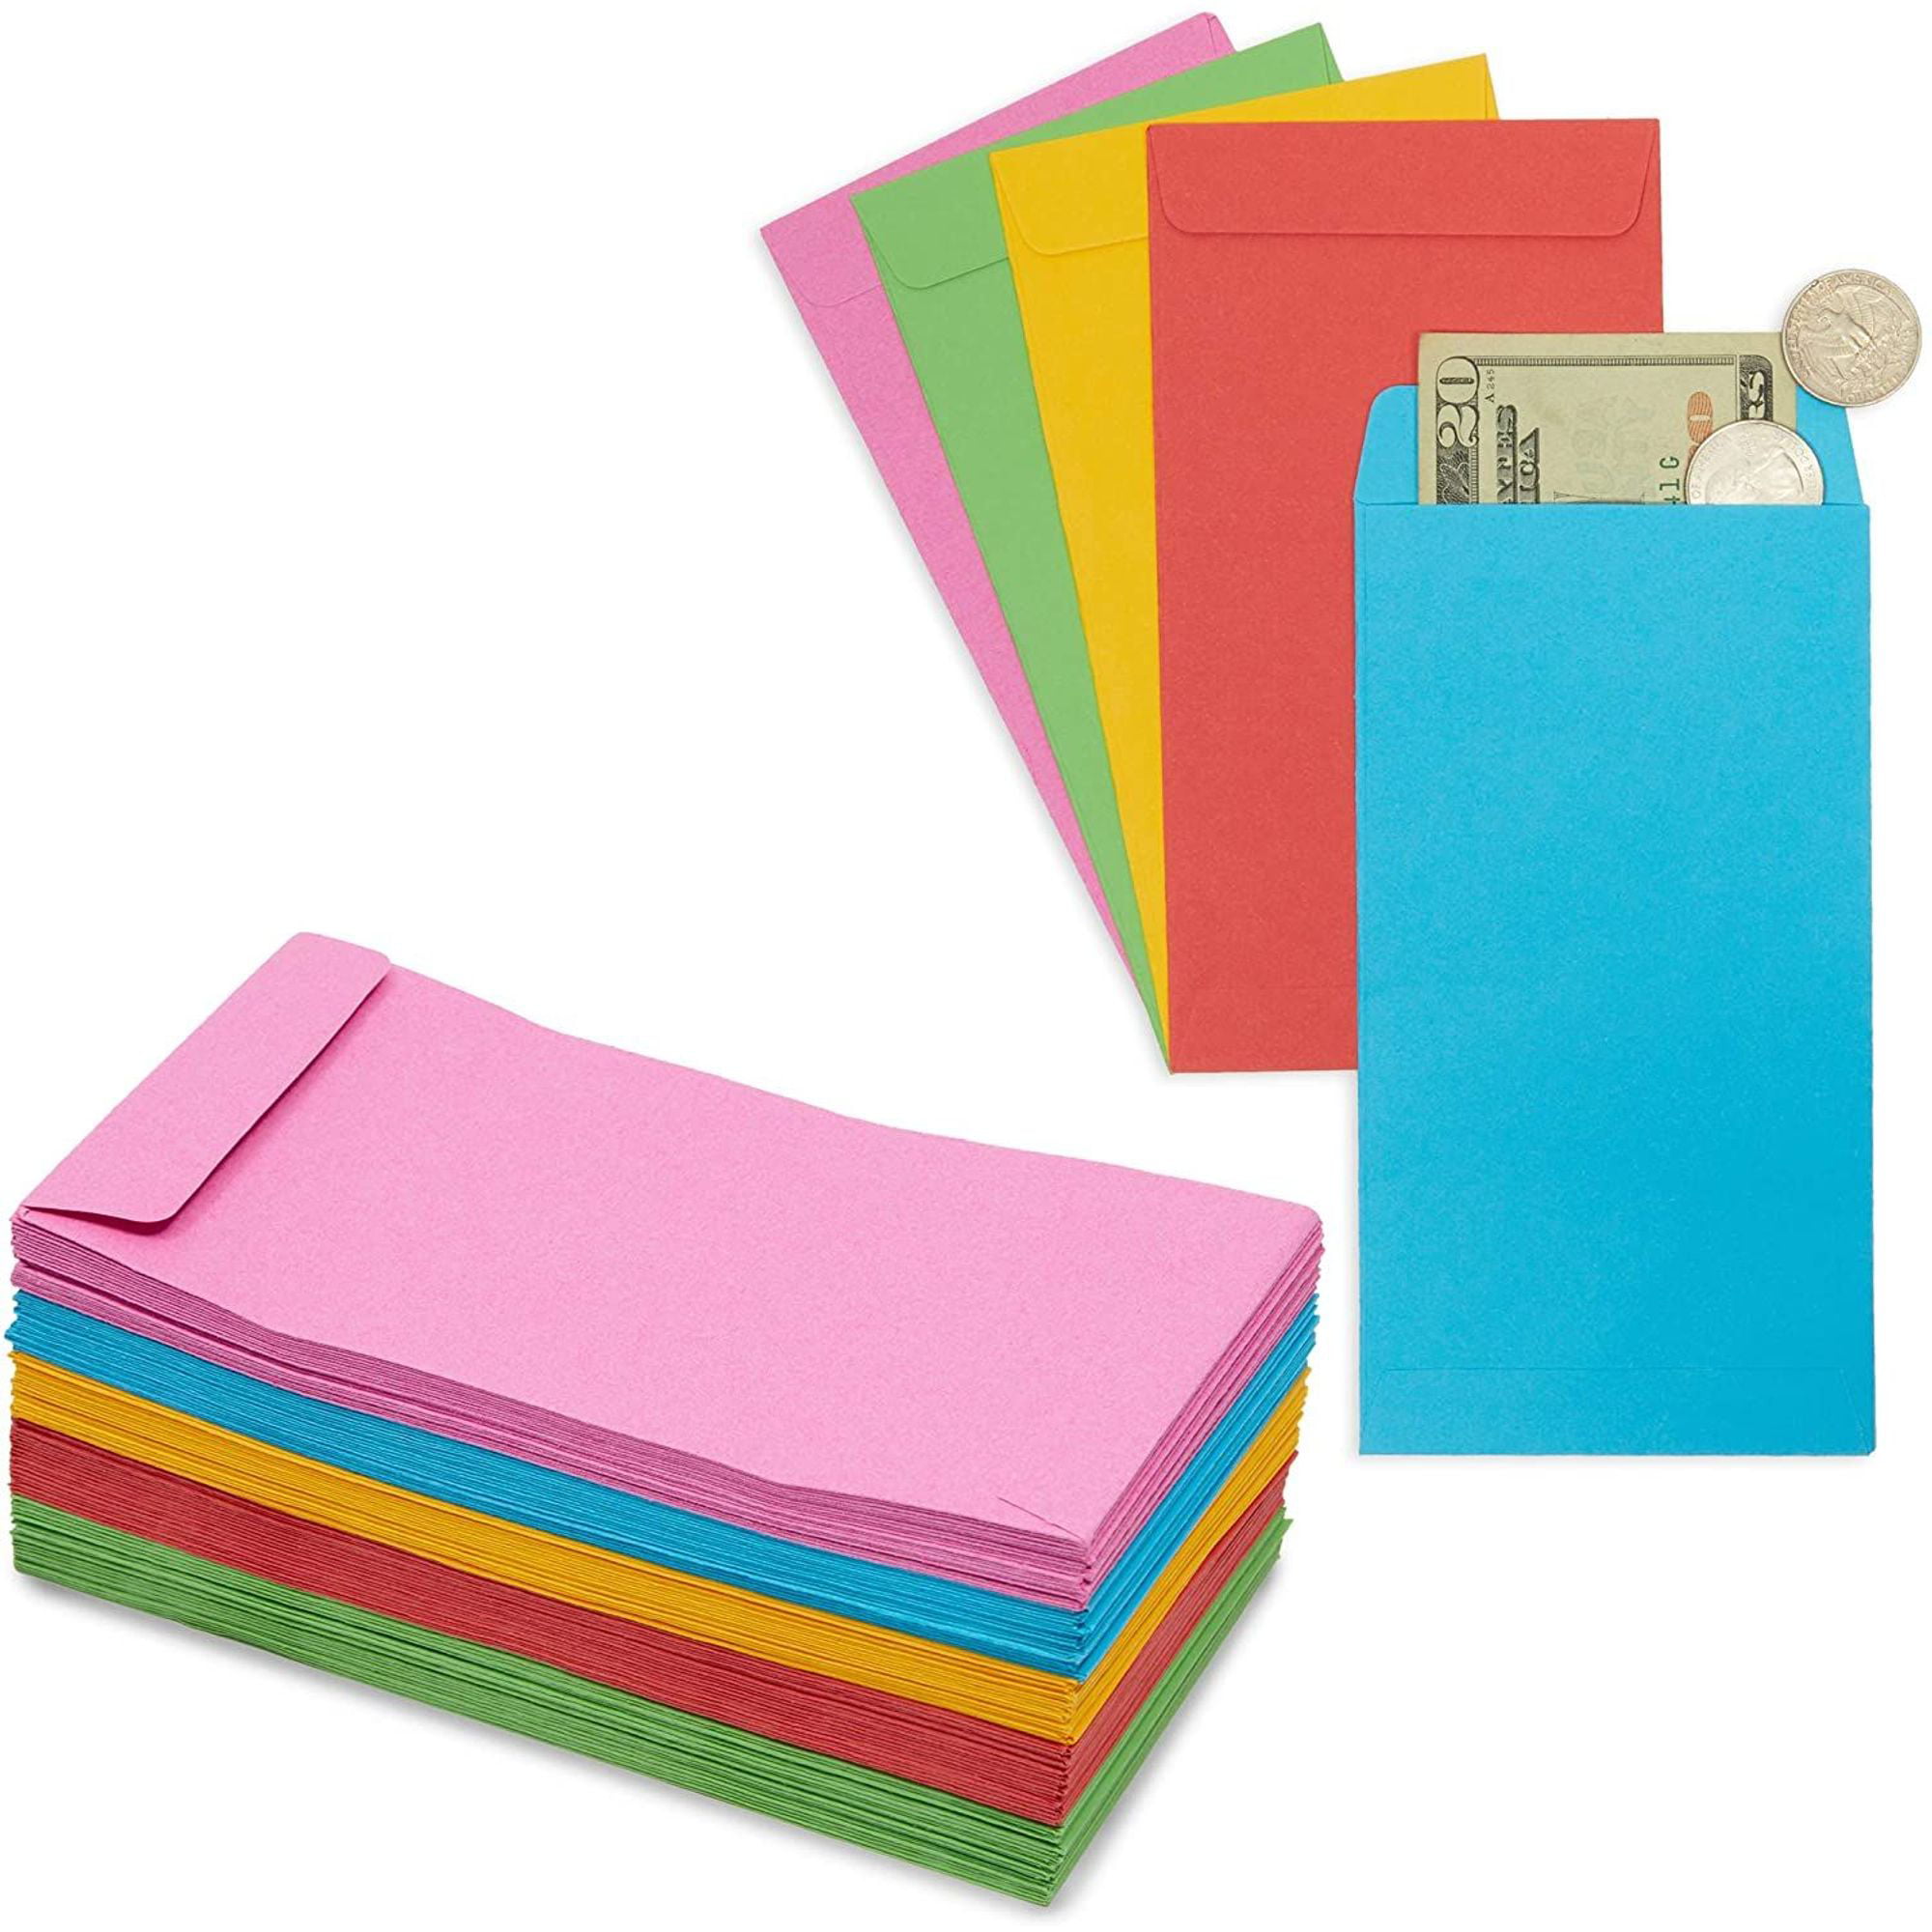 100-pack-colored-cash-envelopes-for-money-saving-budgeting-coins-gift-kraft-paper-3-5-x-6-5